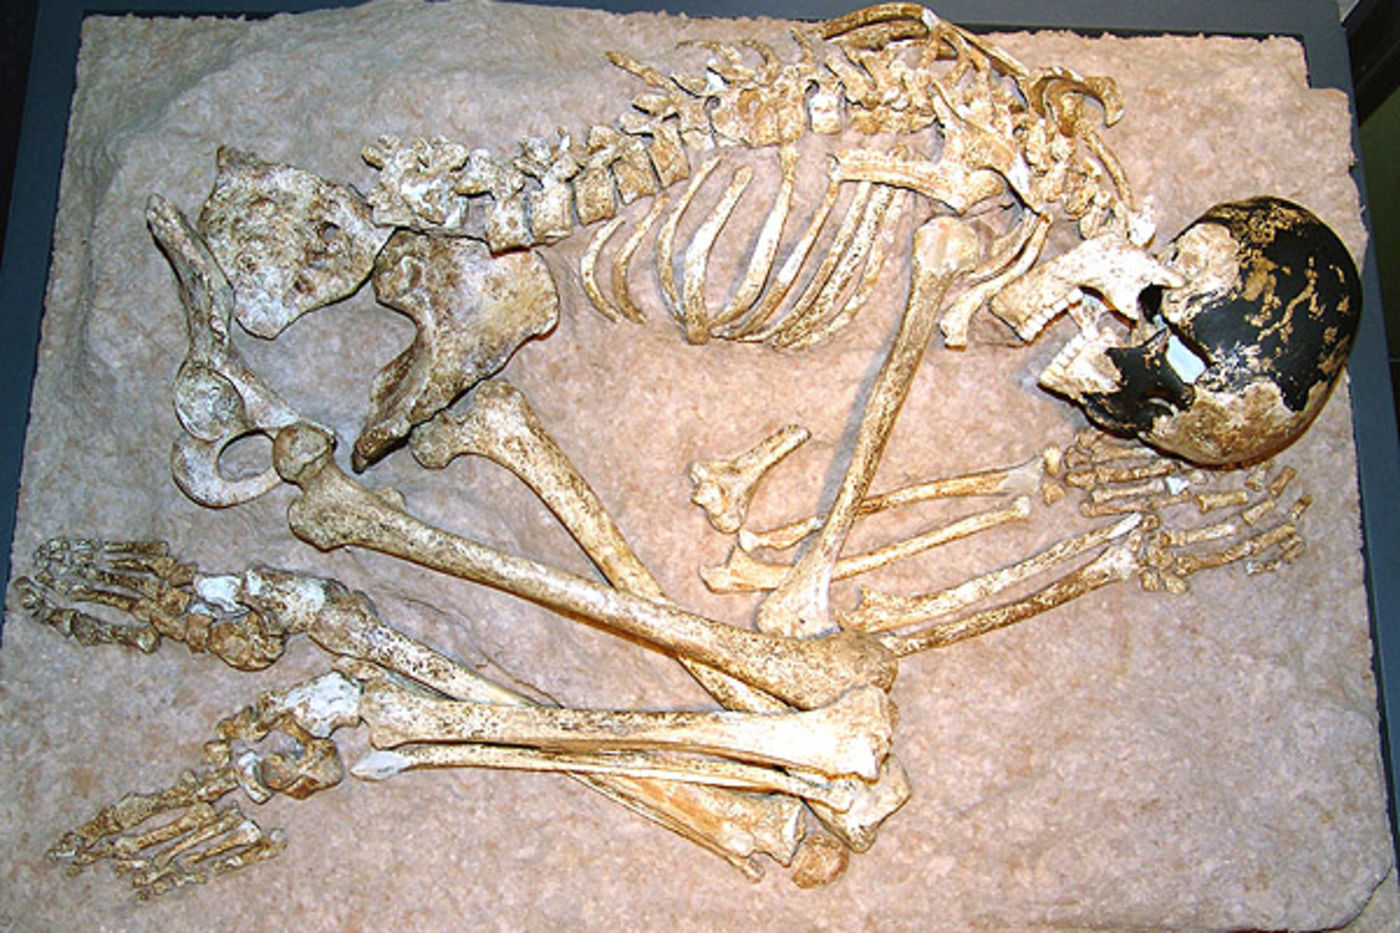 Skeleton of "Magdalenian Girl" as displayed in the permanent exhibit Evolving Planet.